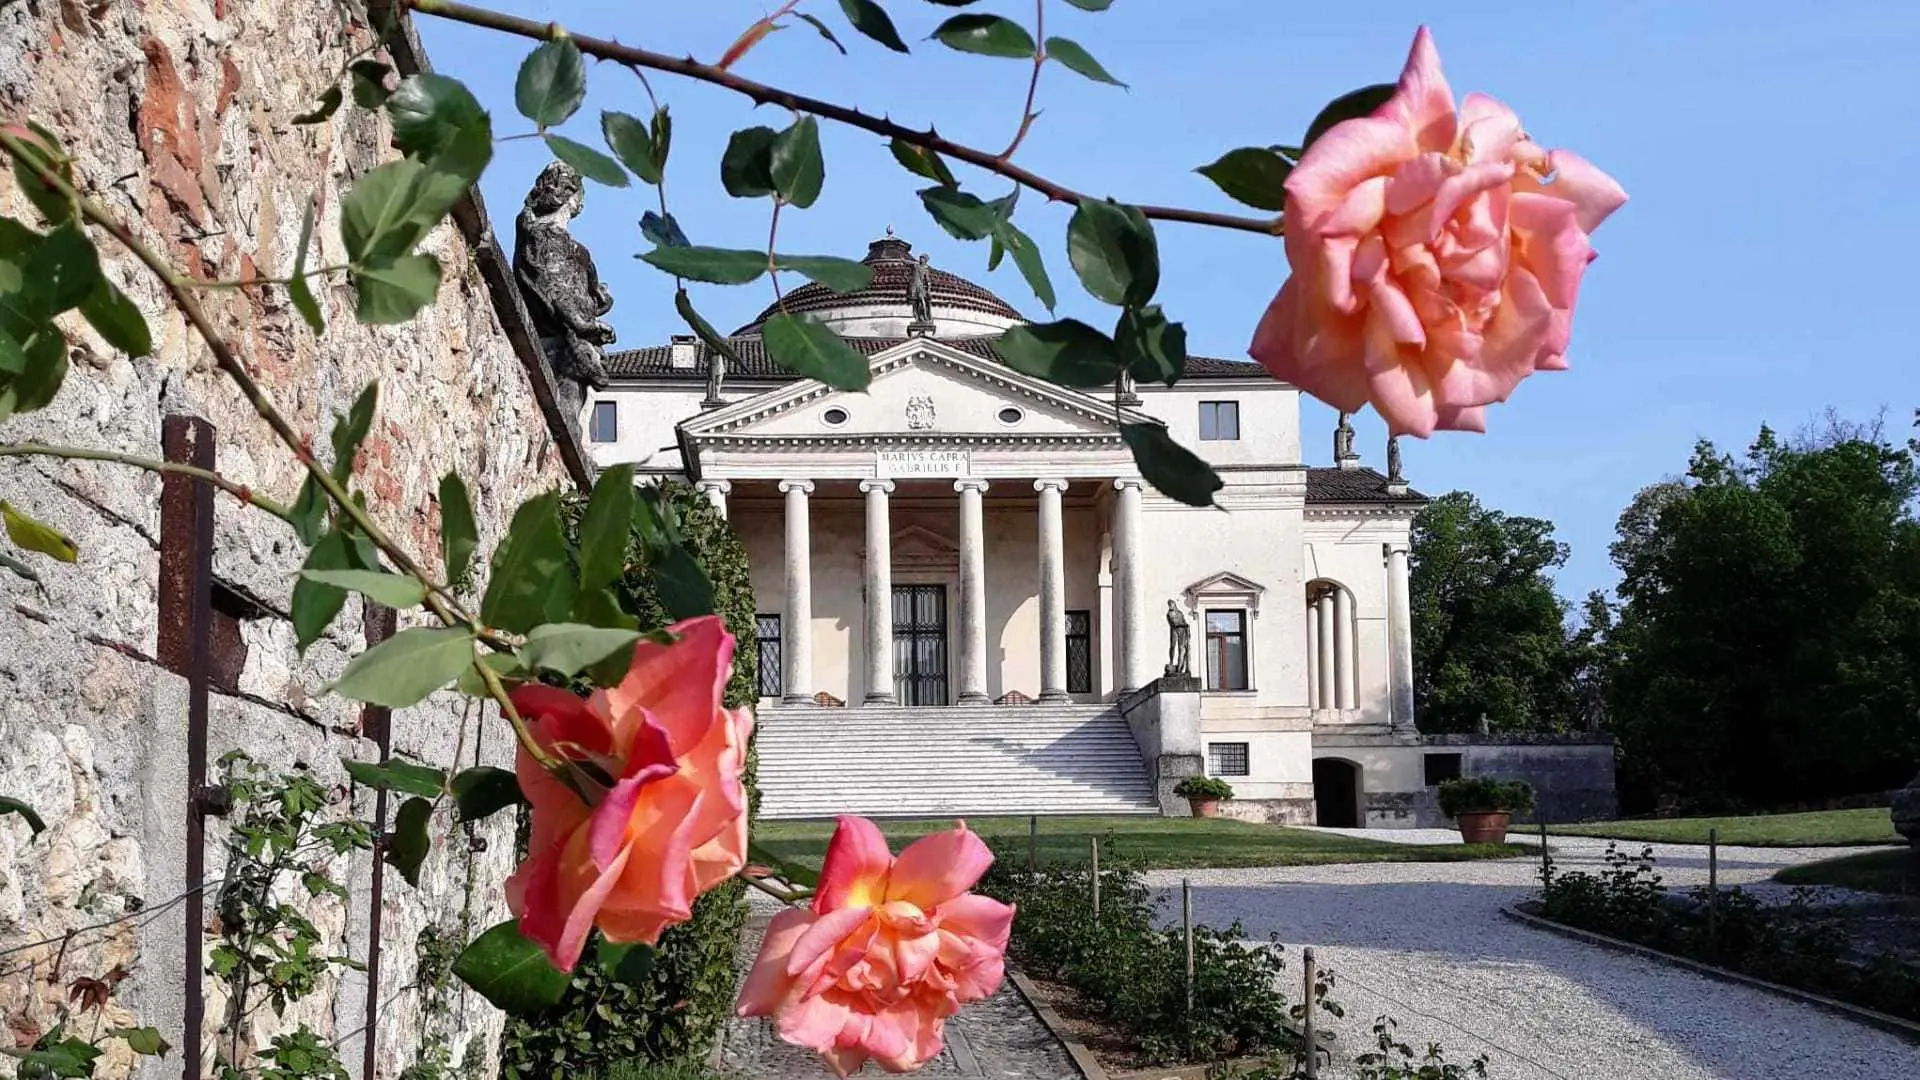 Villa La Rotonda in Vicenza - Guided tour of the exterior and the &lsquo;Noble Floor&rsquo;